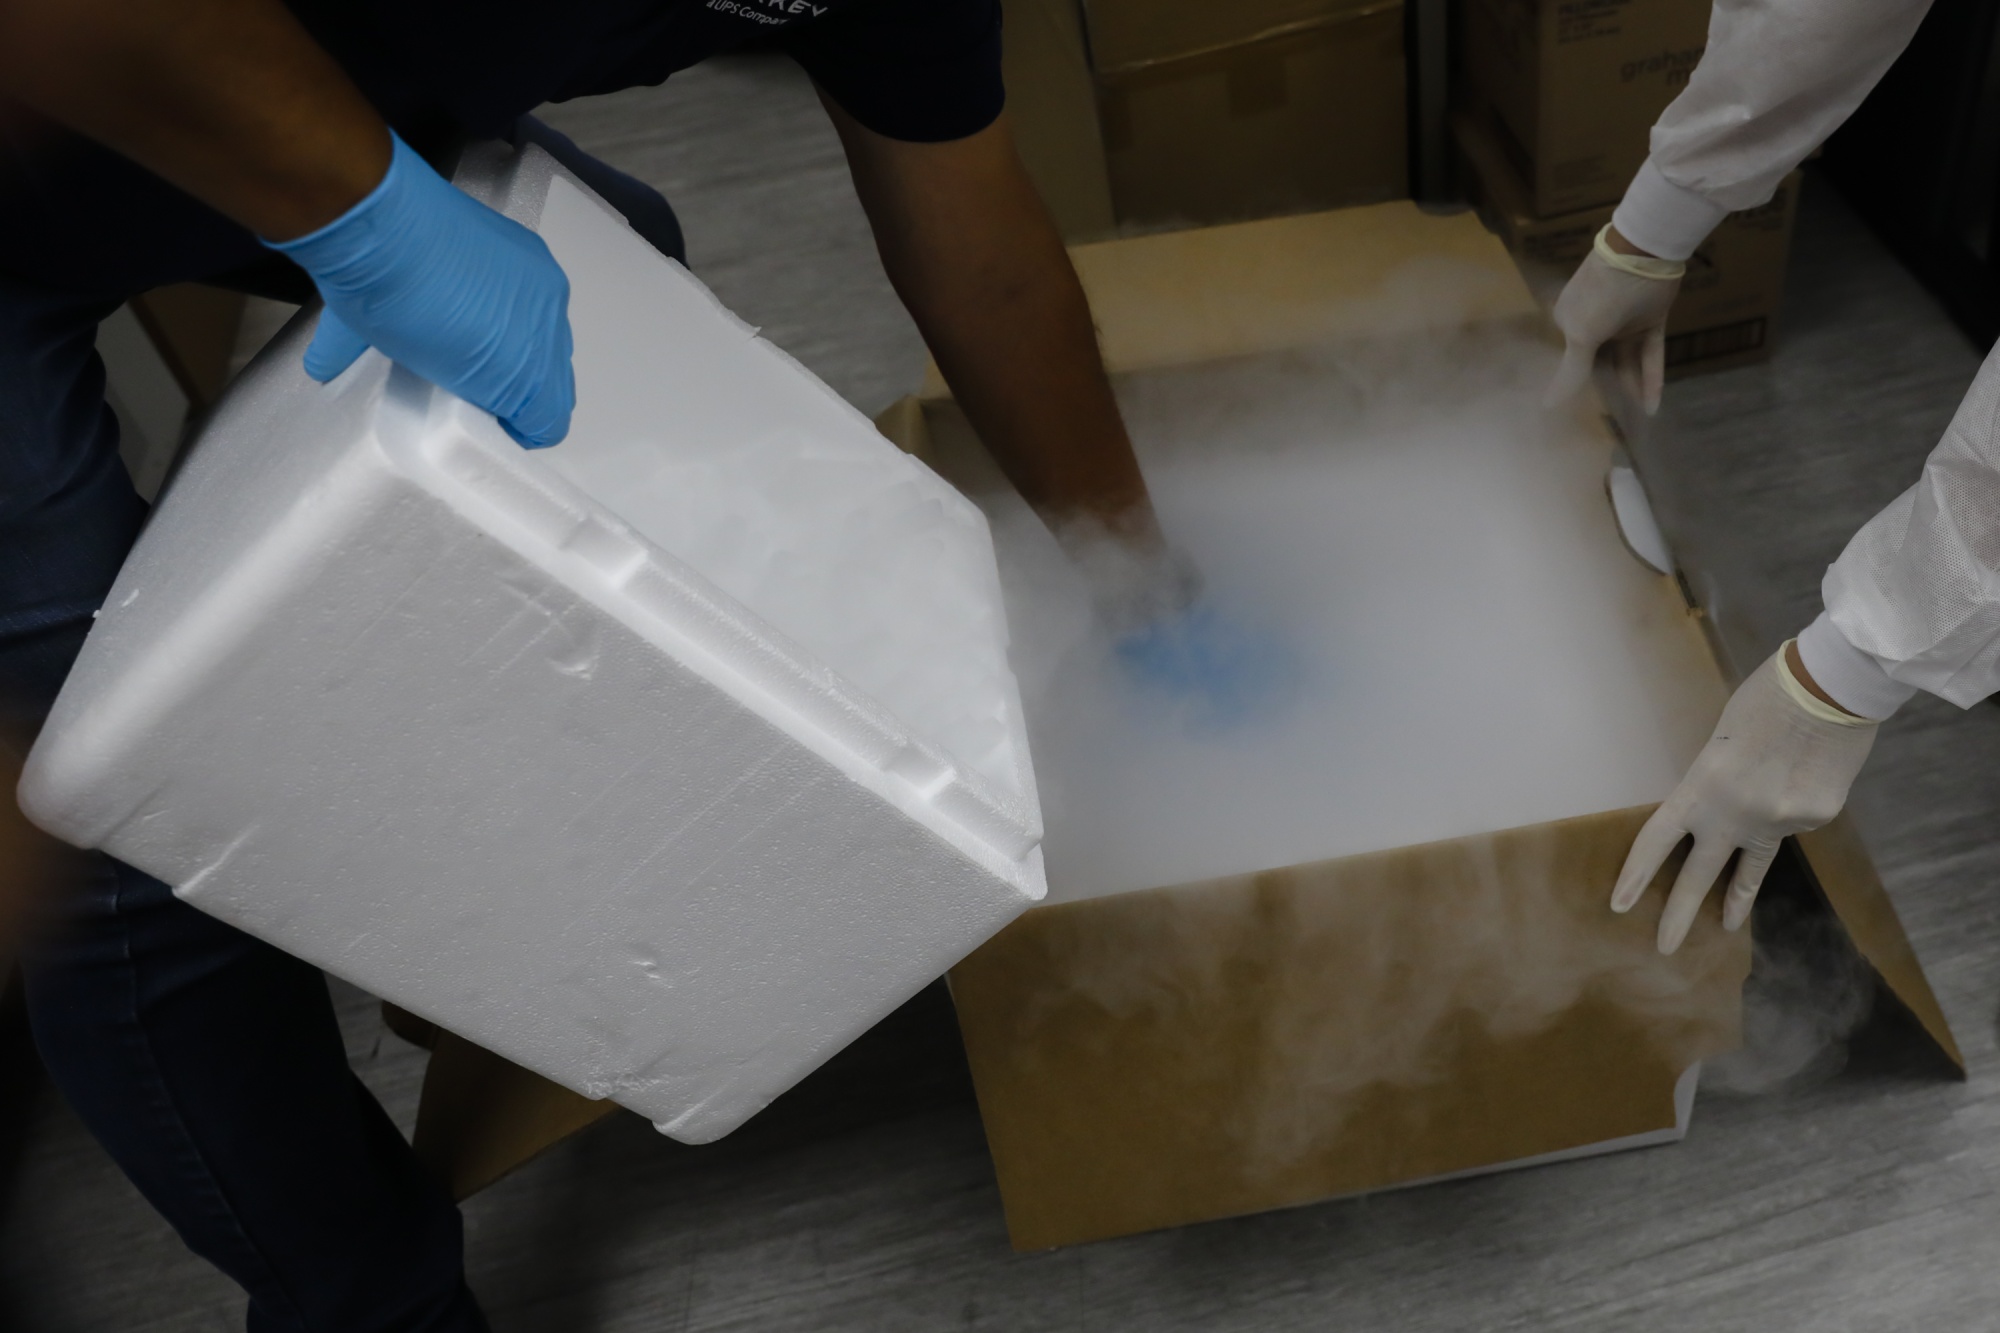 Is Dry Ice the right choice for the transportation of the COVID-19 vaccine?